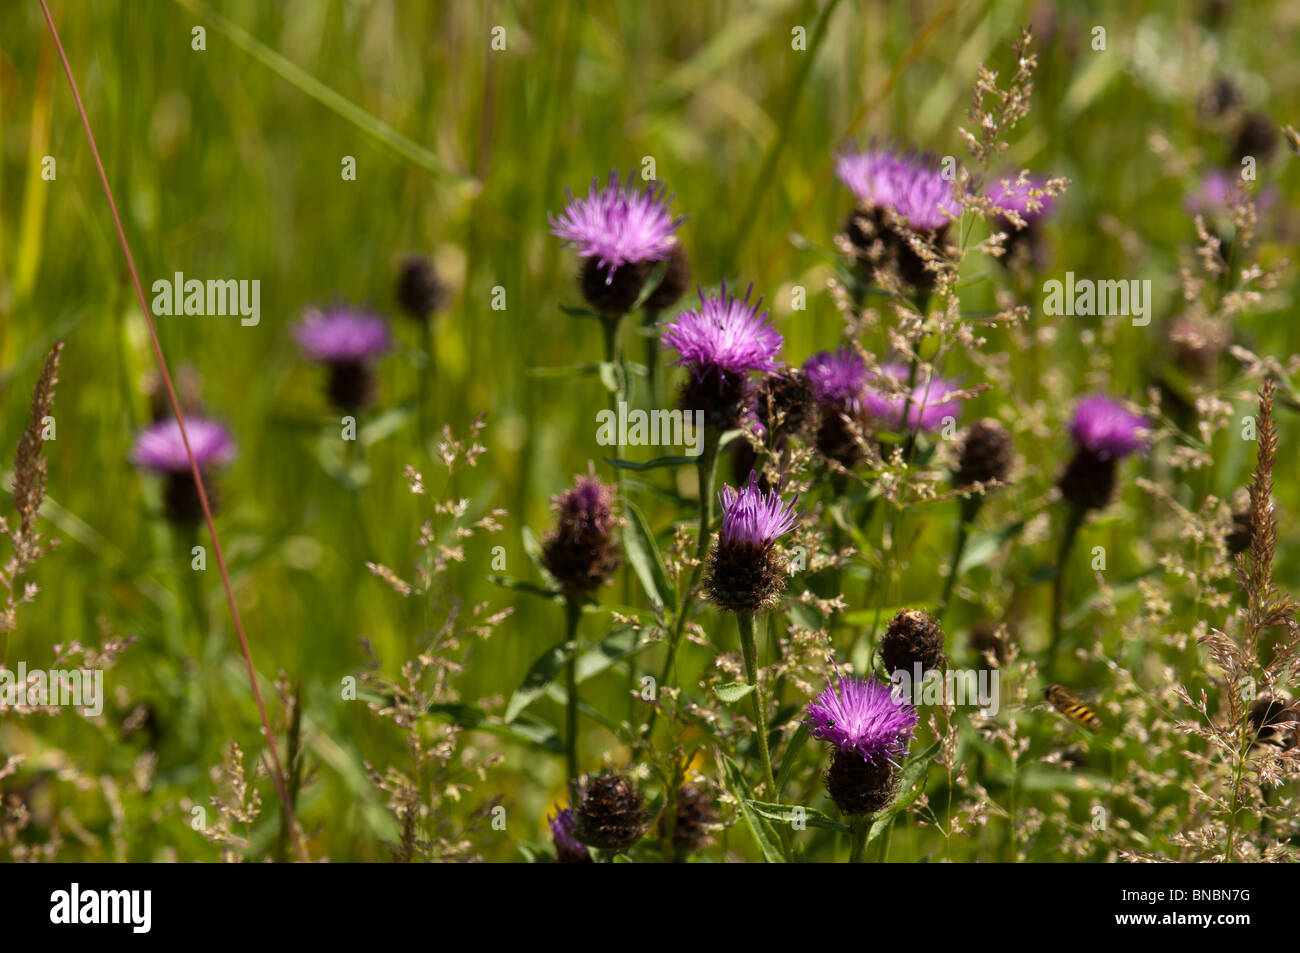 Wild flowers growing in a summer meadow in the South Downs National Park at West Dean in West Sussex, England. Stock Photo